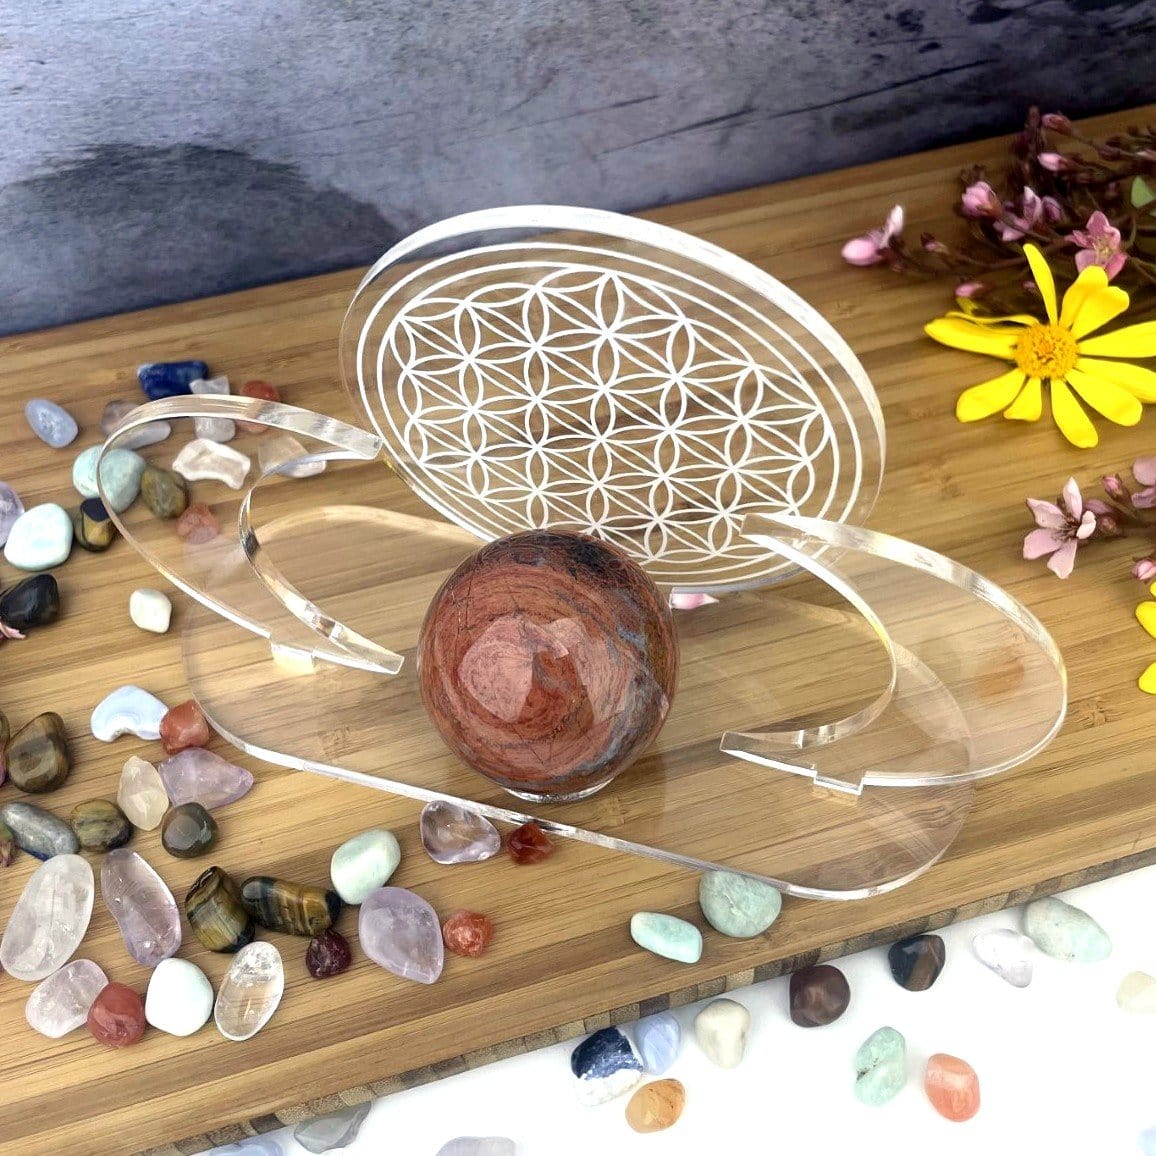 Acrylic Sphere Holder - Crescent Moons with Flower of Life shown from the top in an alter holding a sphere. Flowers and crystals surrounding the holder.